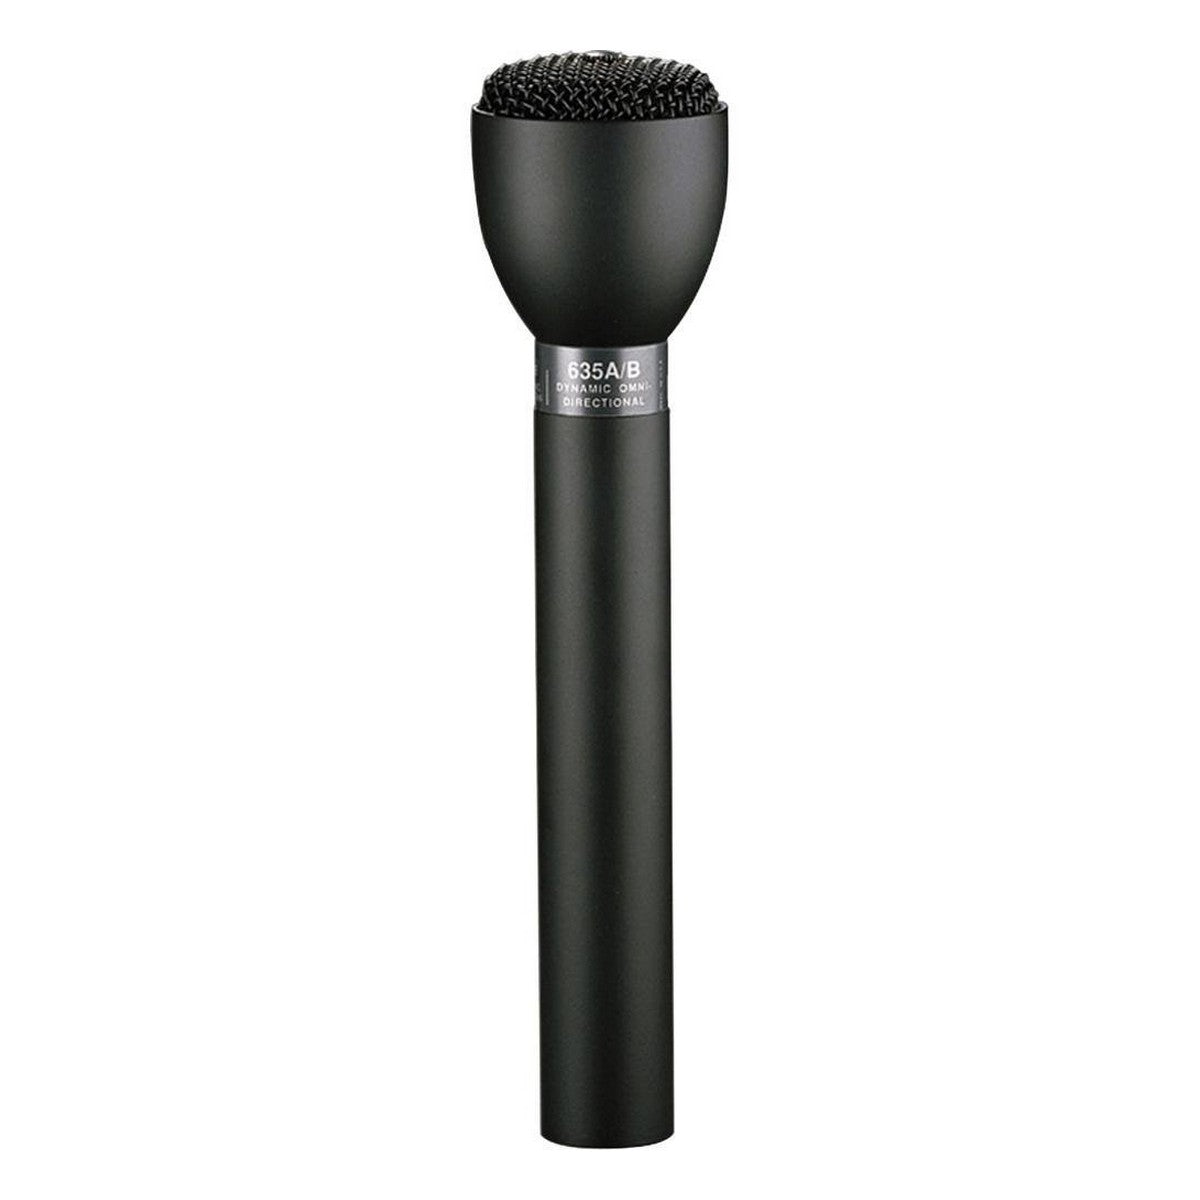 Electro-Voice 635A/B Classic Handheld Interview Black Microphone